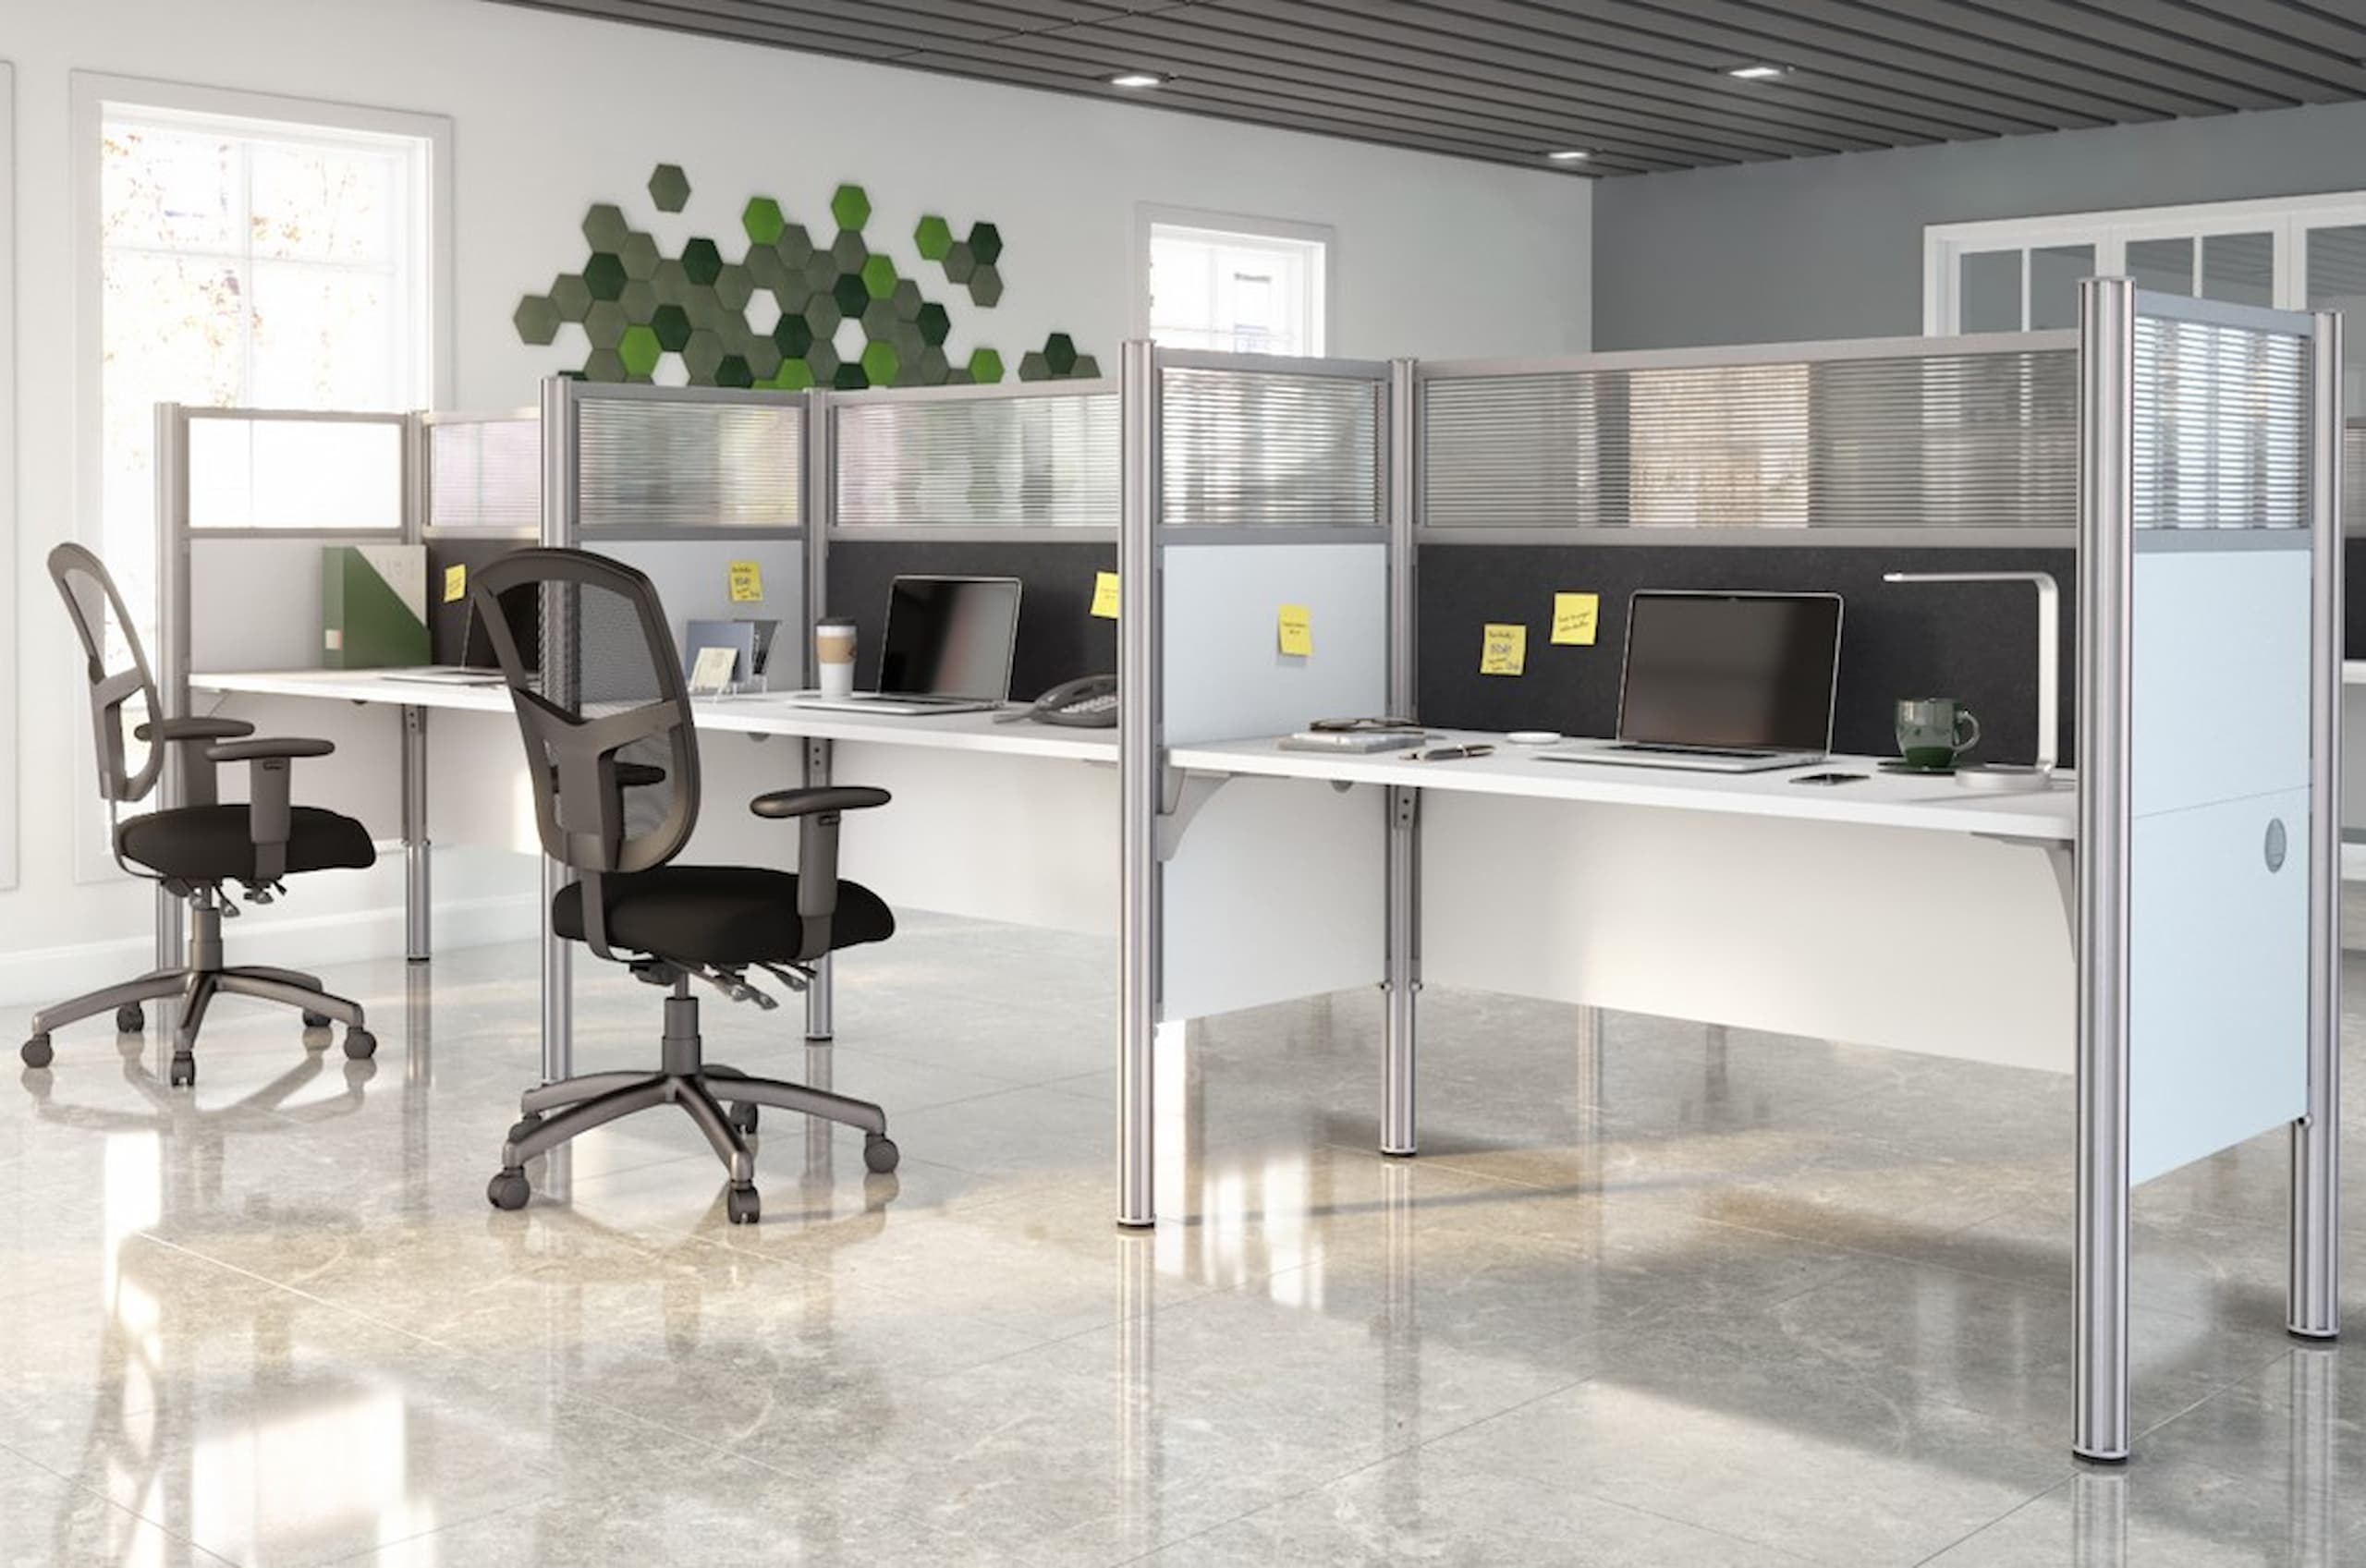 Office cubicles in a productive workspace